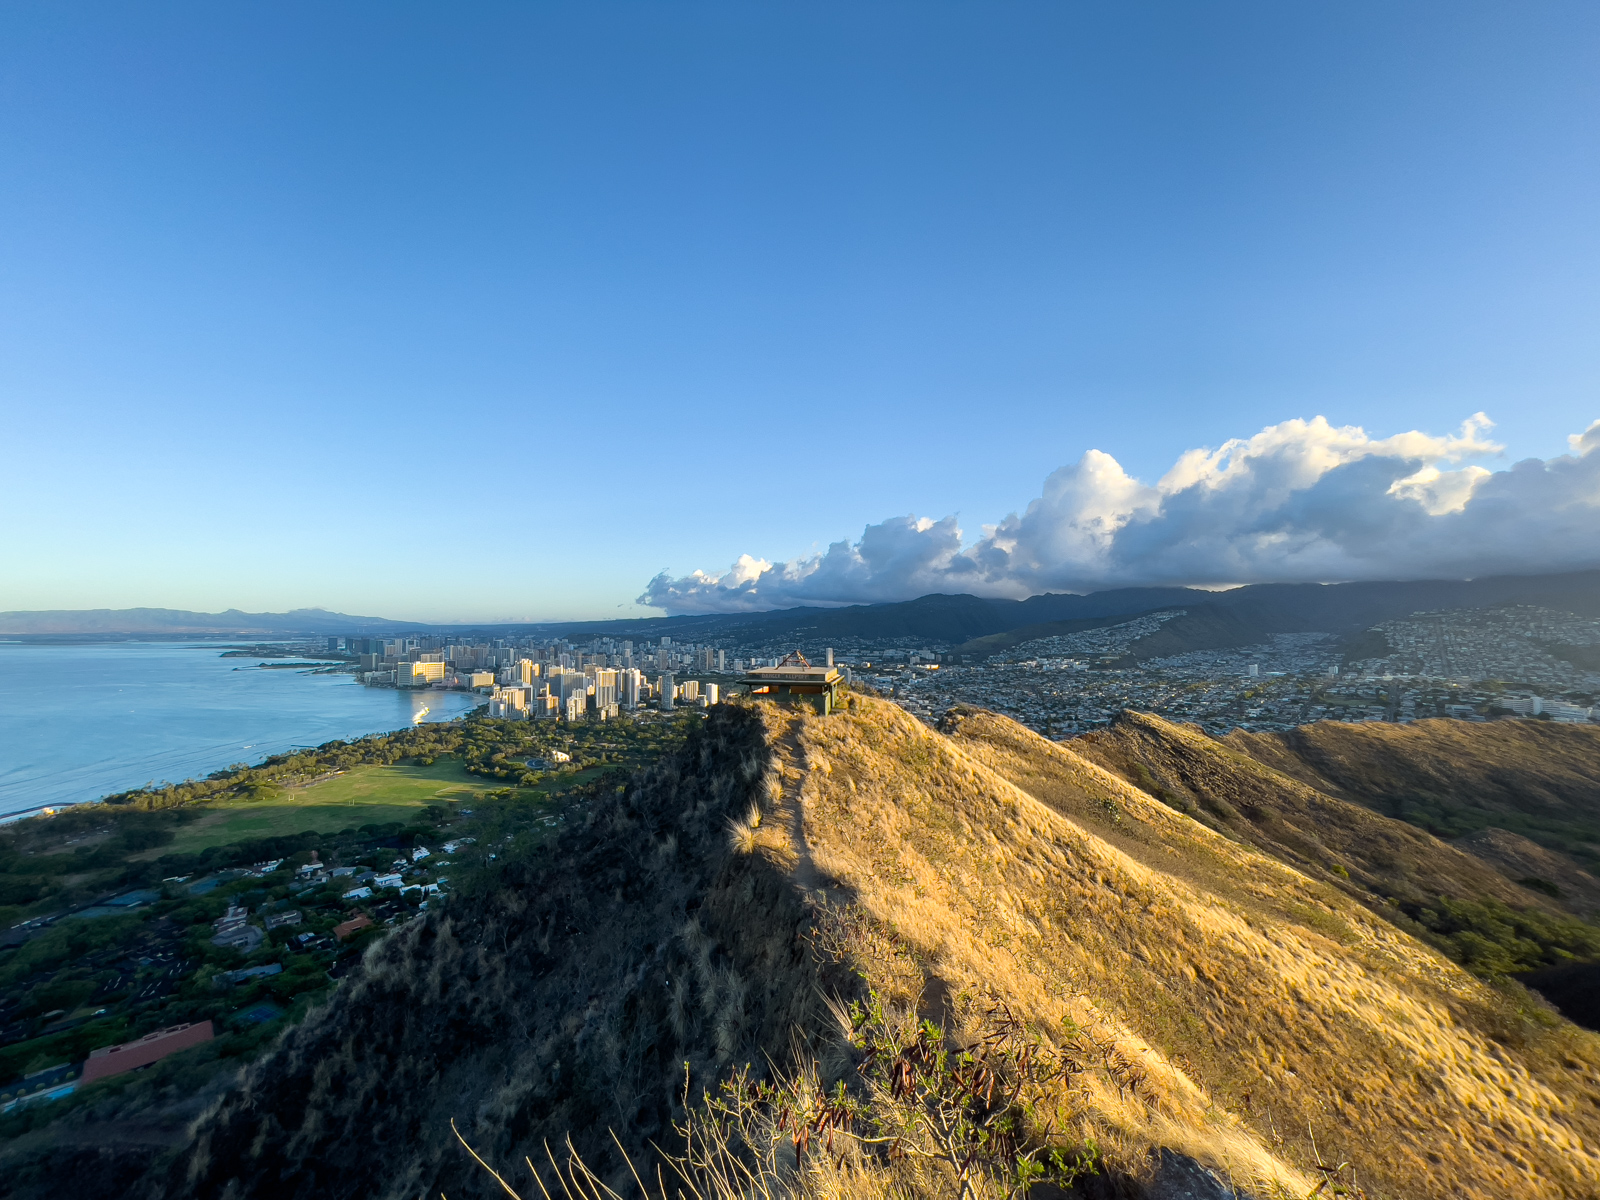 Looking west to Waikiki from summit lookout on Diamond Head at sunrise